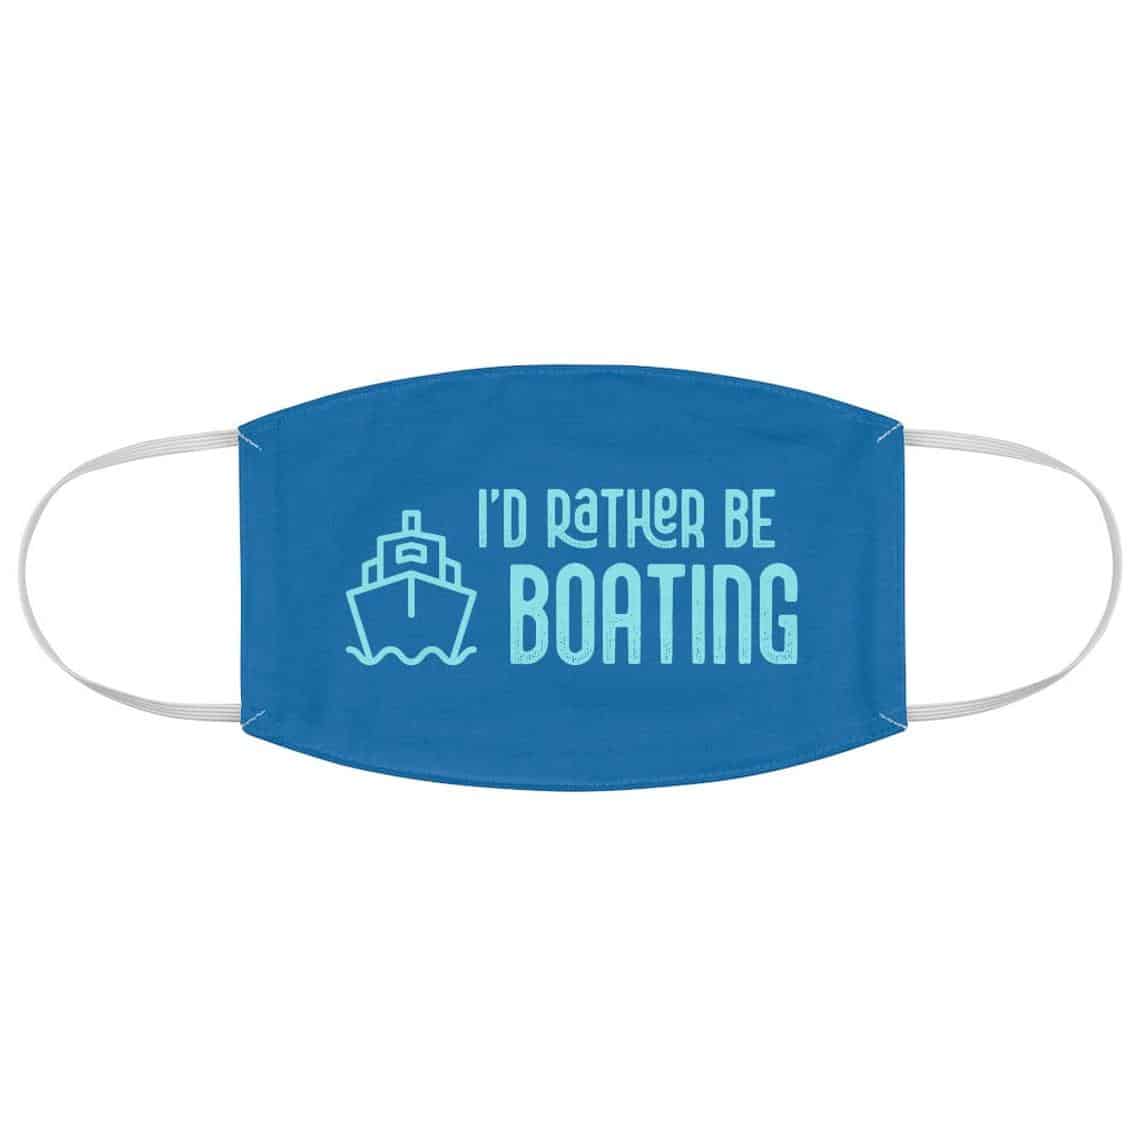 The Boater’s Facemask